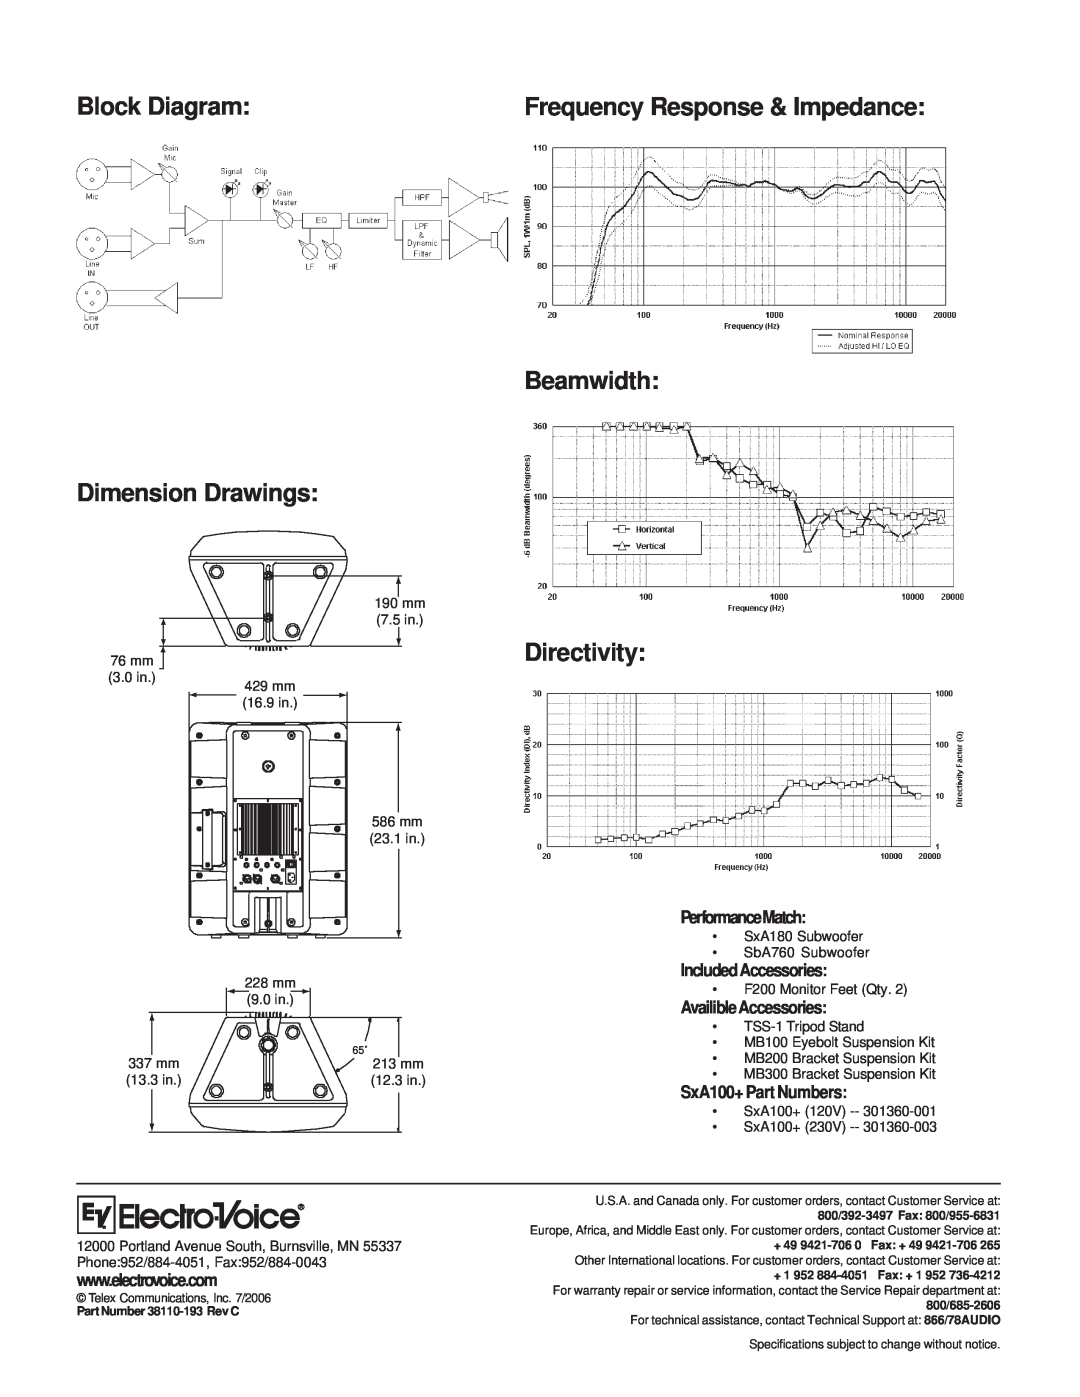 Electro-Voice SxA100+ Block Diagram, Beamwidth Dimension Drawings, Directivity, Frequency Response & Impedance 